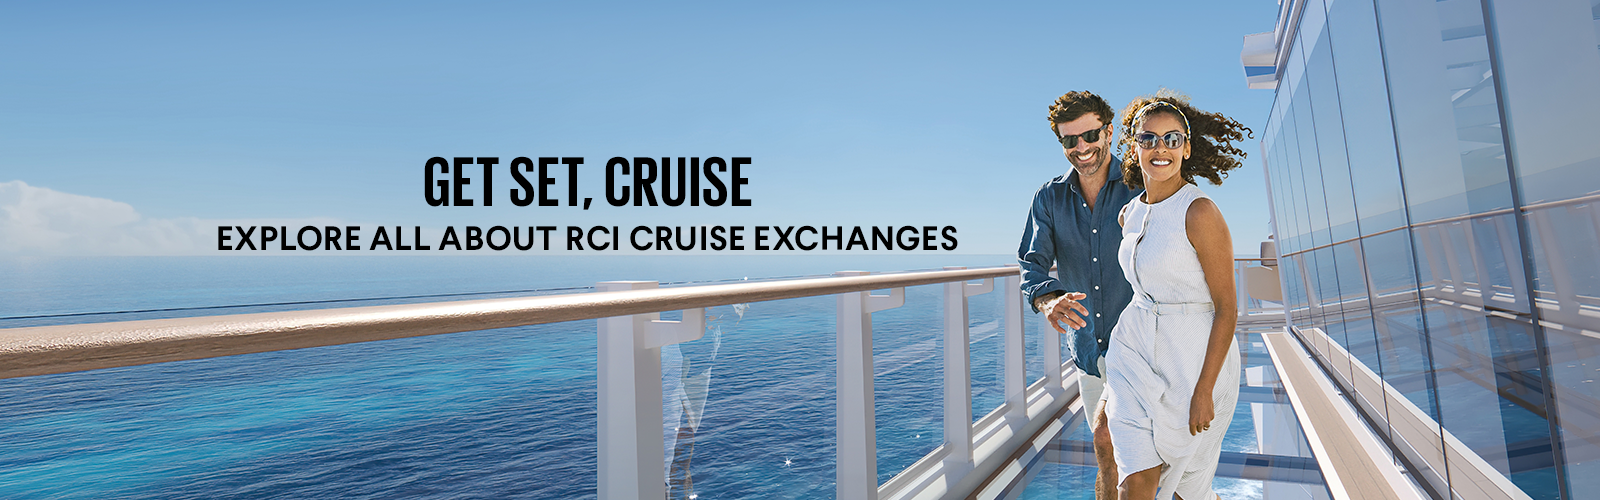 EXPLORE ALL ABOUT RCI CRUISE EXCHANGES